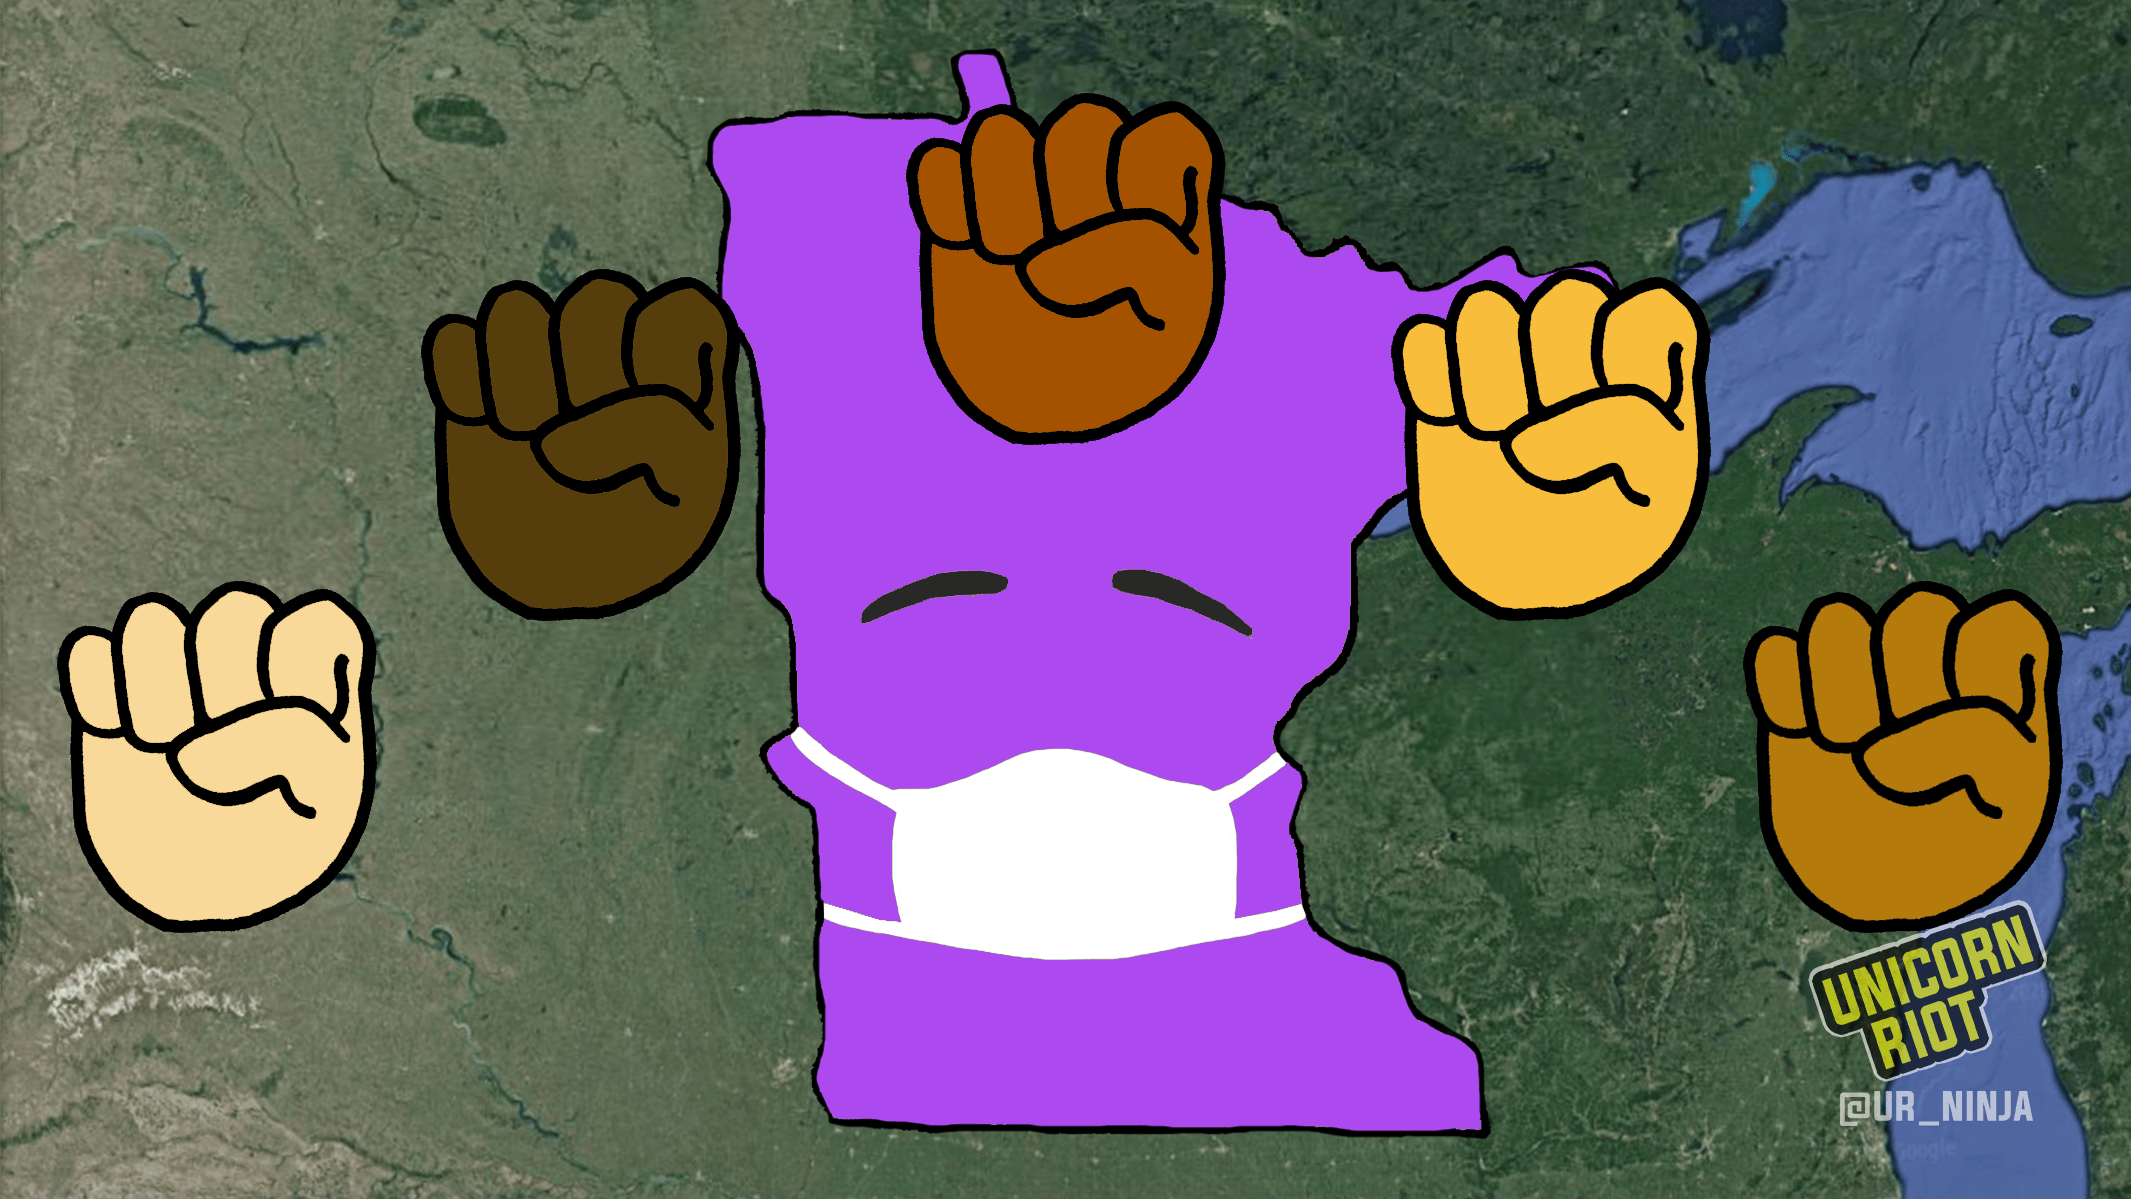 image shows the state of Minnesota silhouetted in purple, wearing a face mask. Five raised fists appear in an arc above the image.